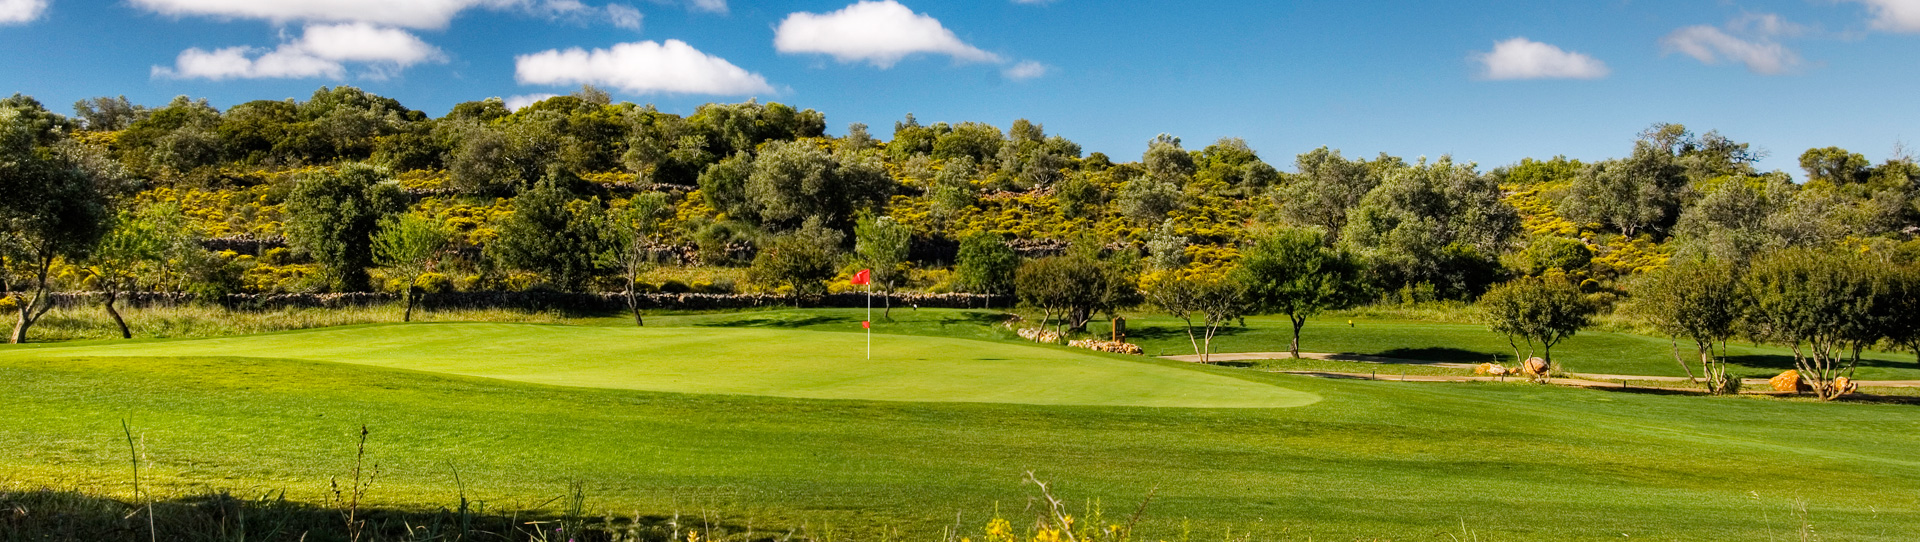 Portugal golf courses - Silves Golf Course - Photo 2